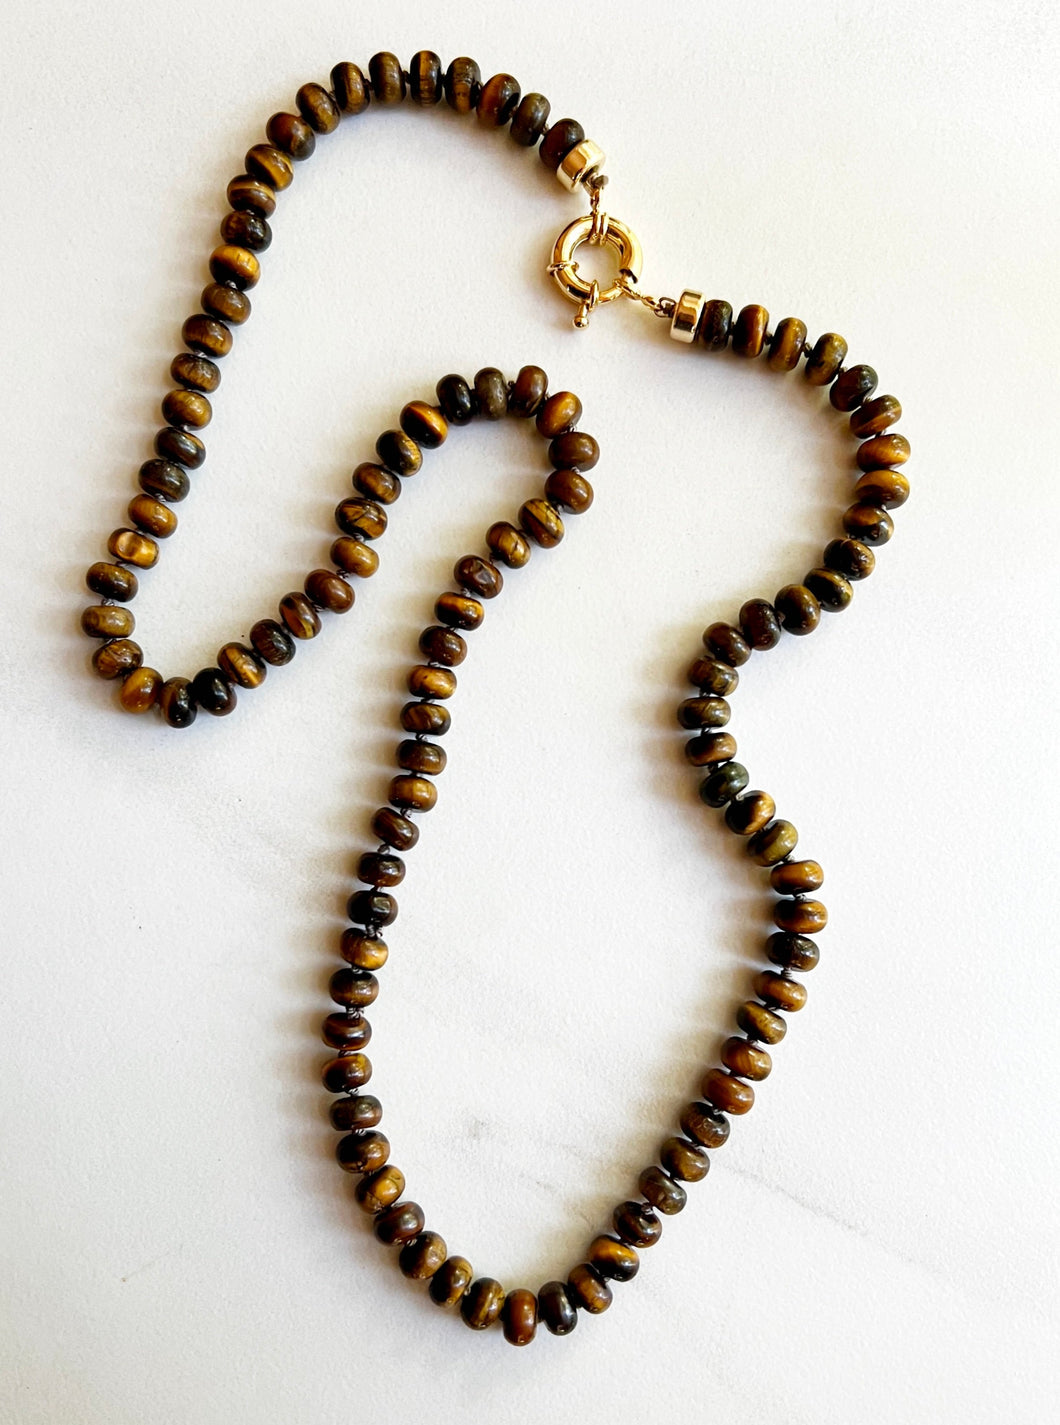 A stunning 26-inch tiger eye necklace, a symbol of courage and protection